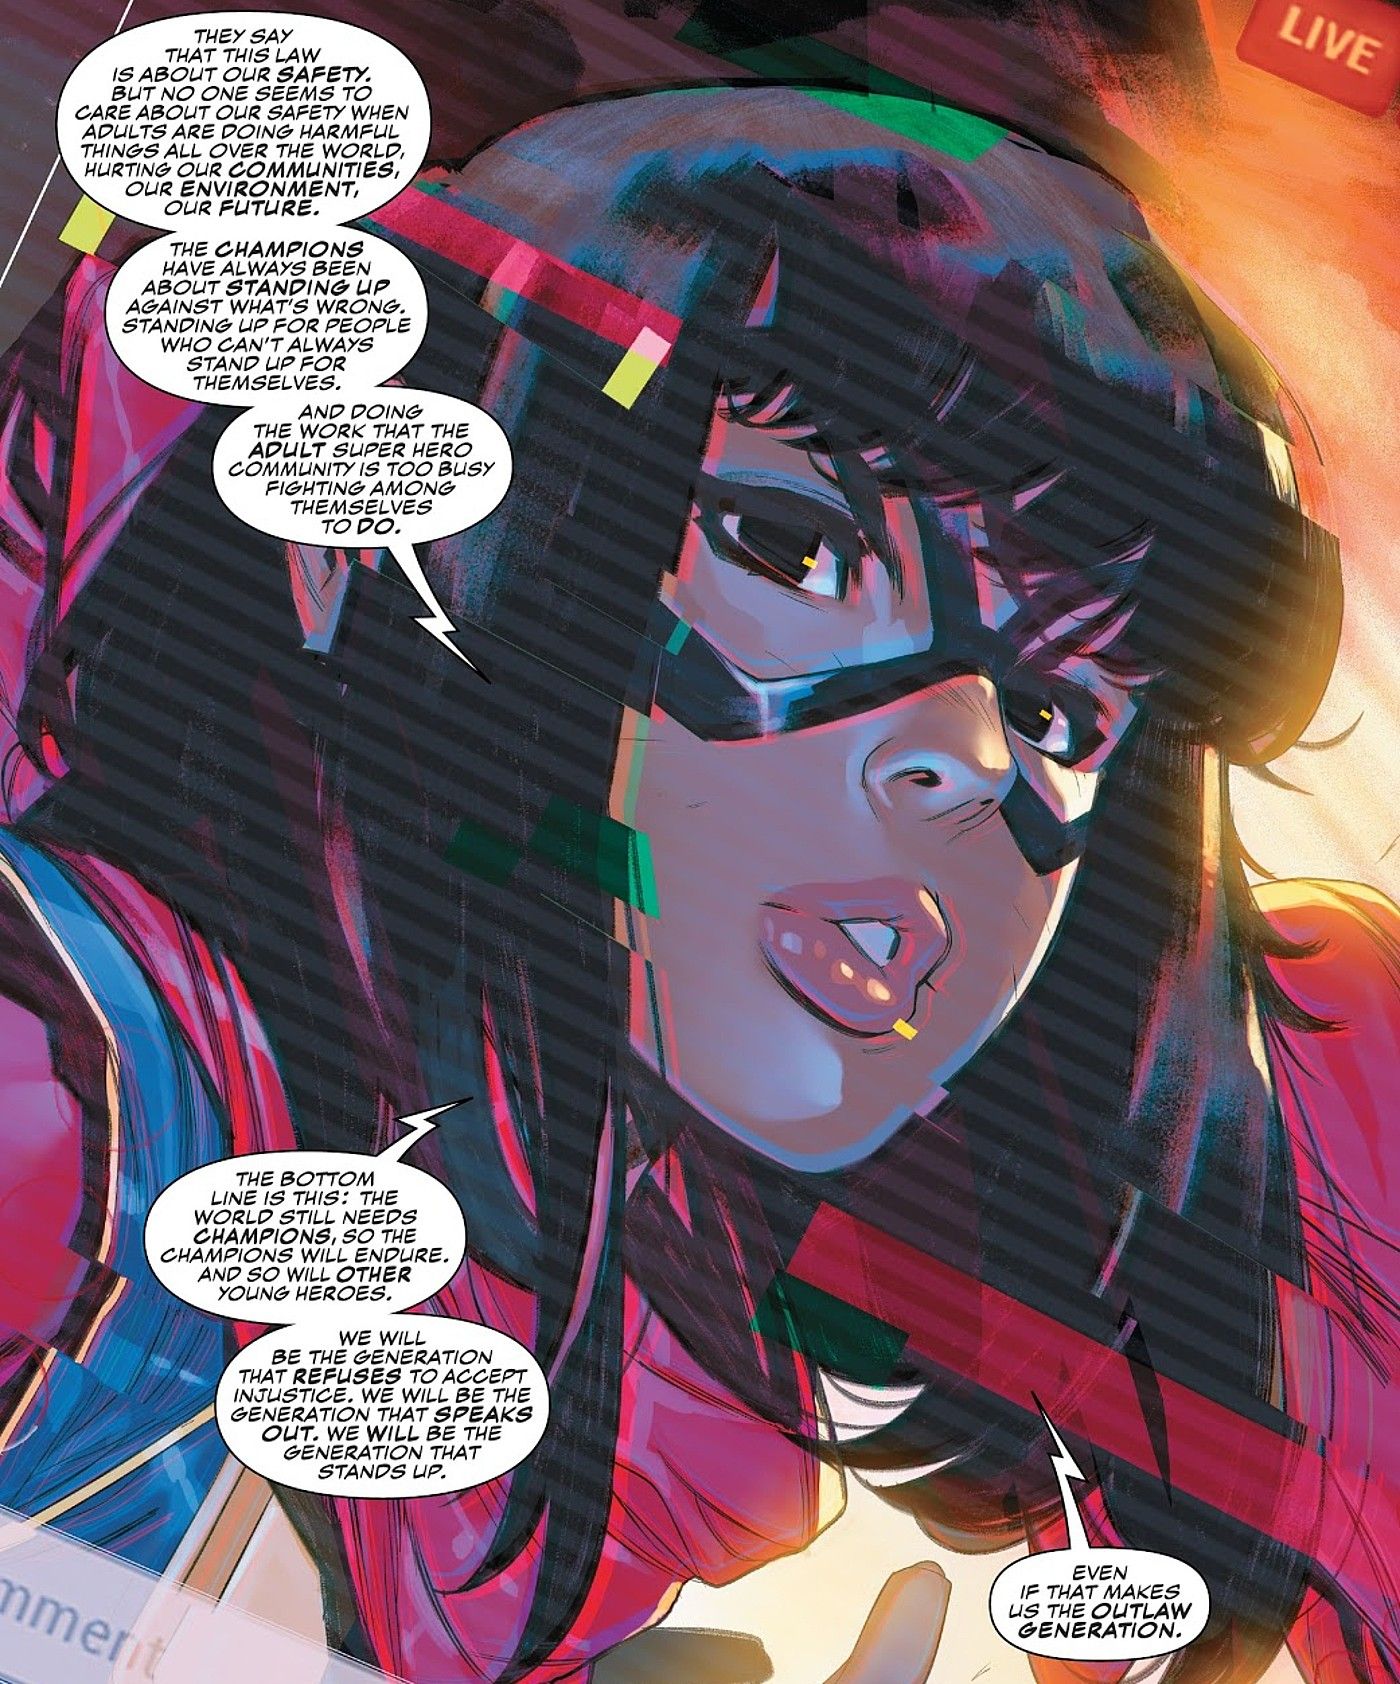 Ms. Marvel Outlaw Generation